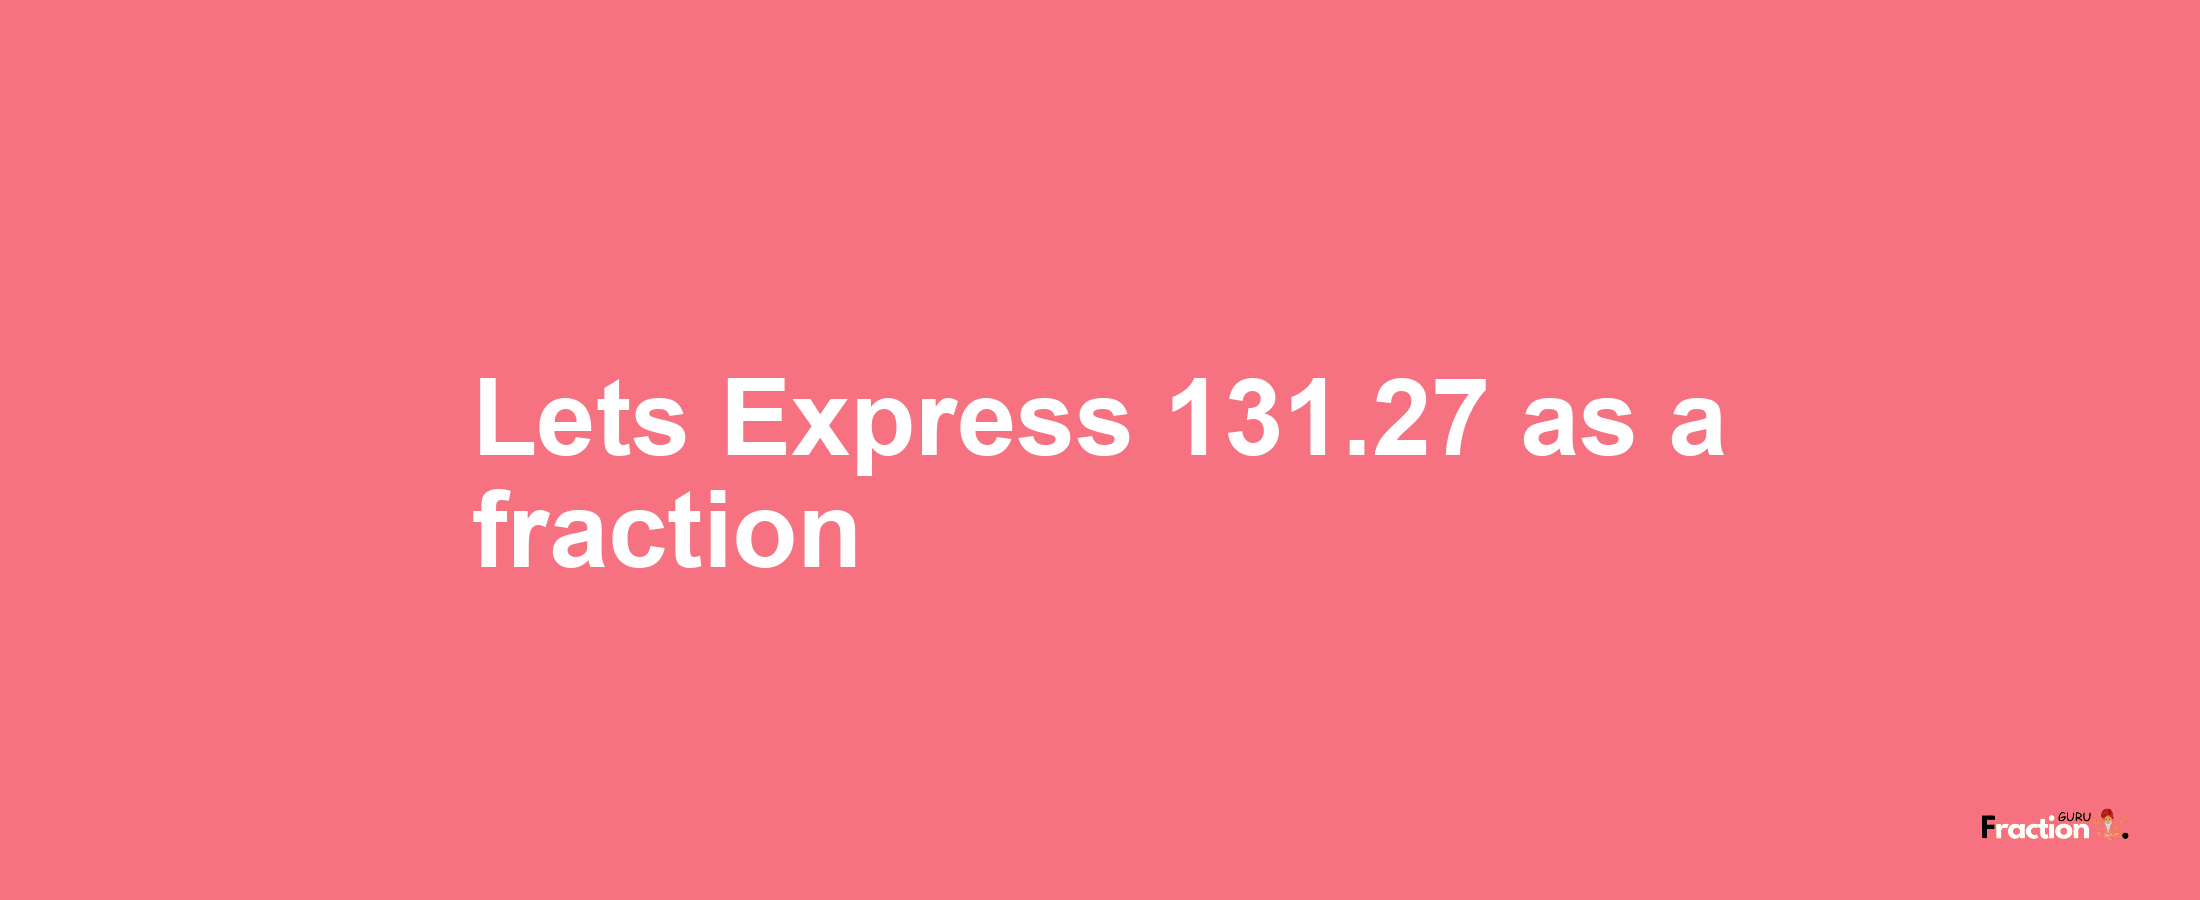 Lets Express 131.27 as afraction